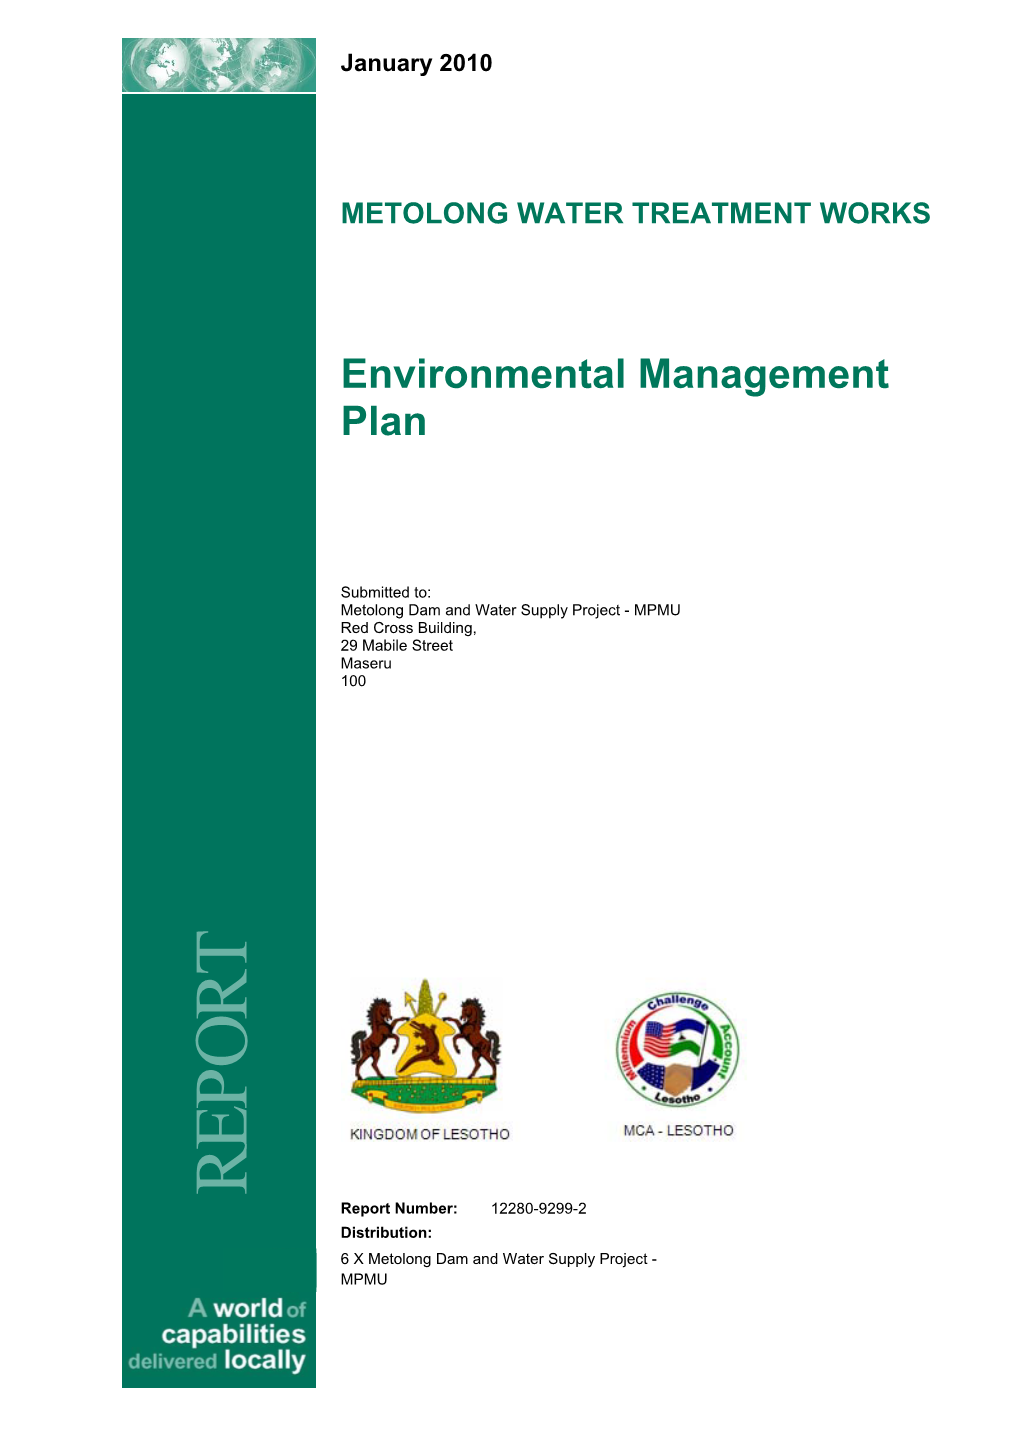 Metolong Water Treatment Works and Environmental